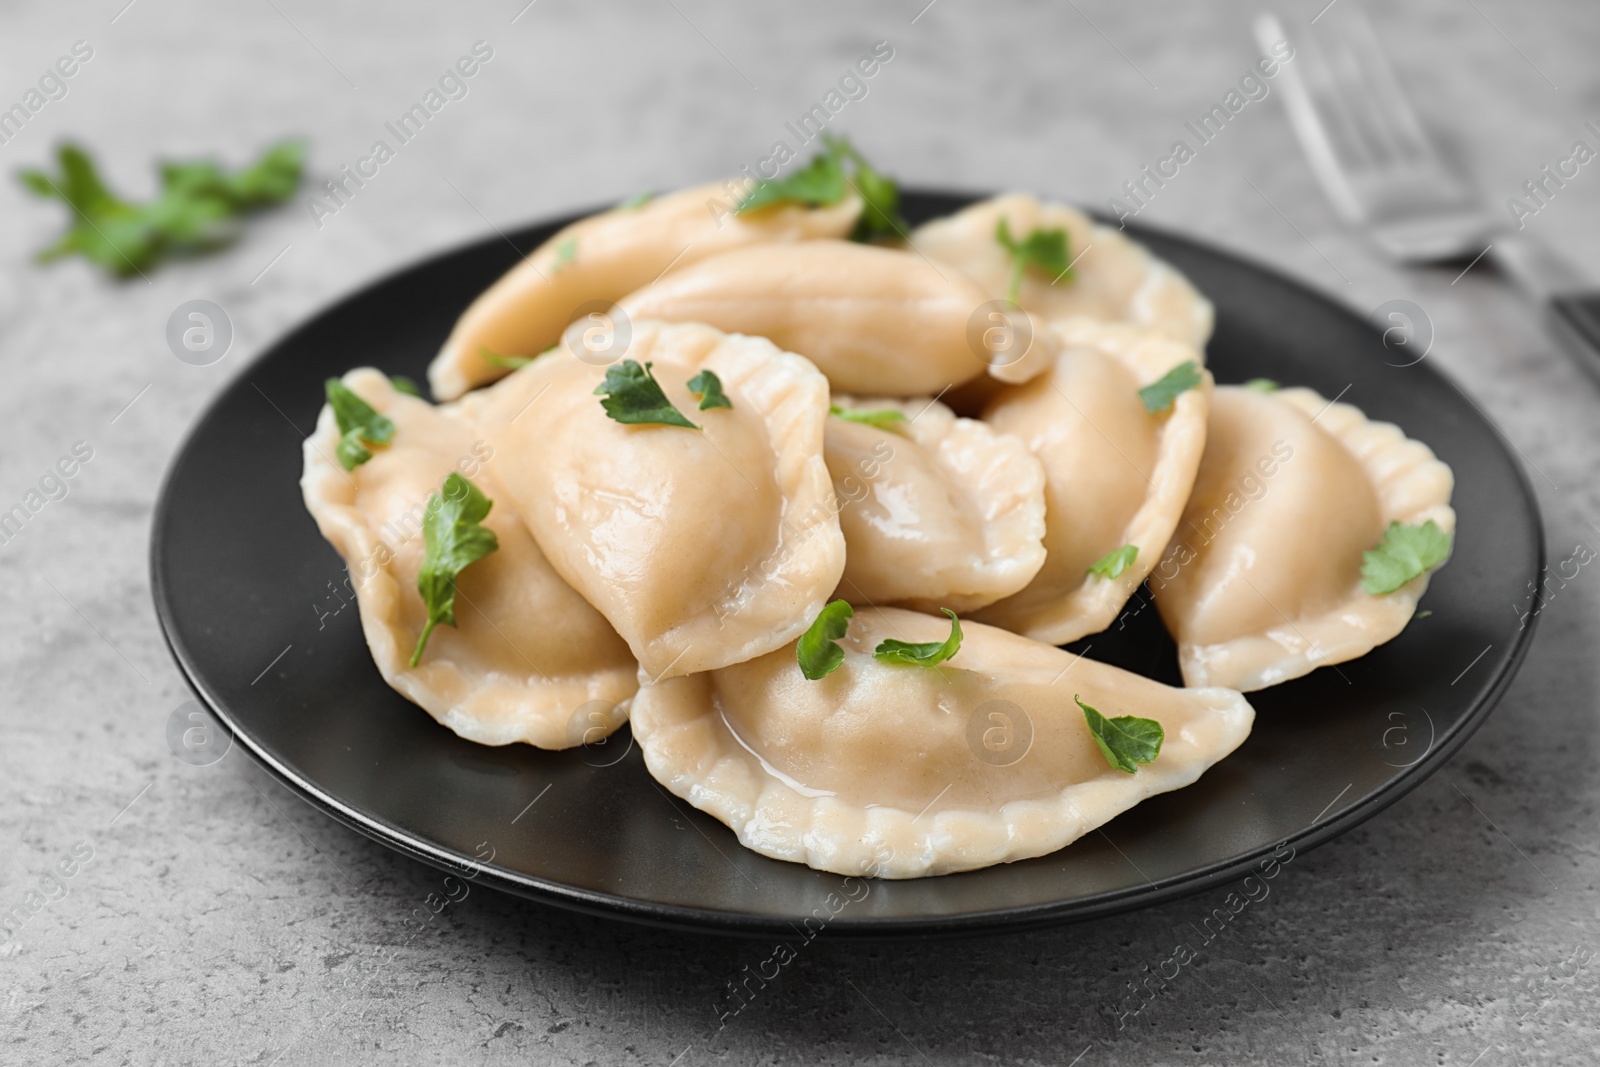 Photo of Plate of tasty cooked dumplings on stone surface